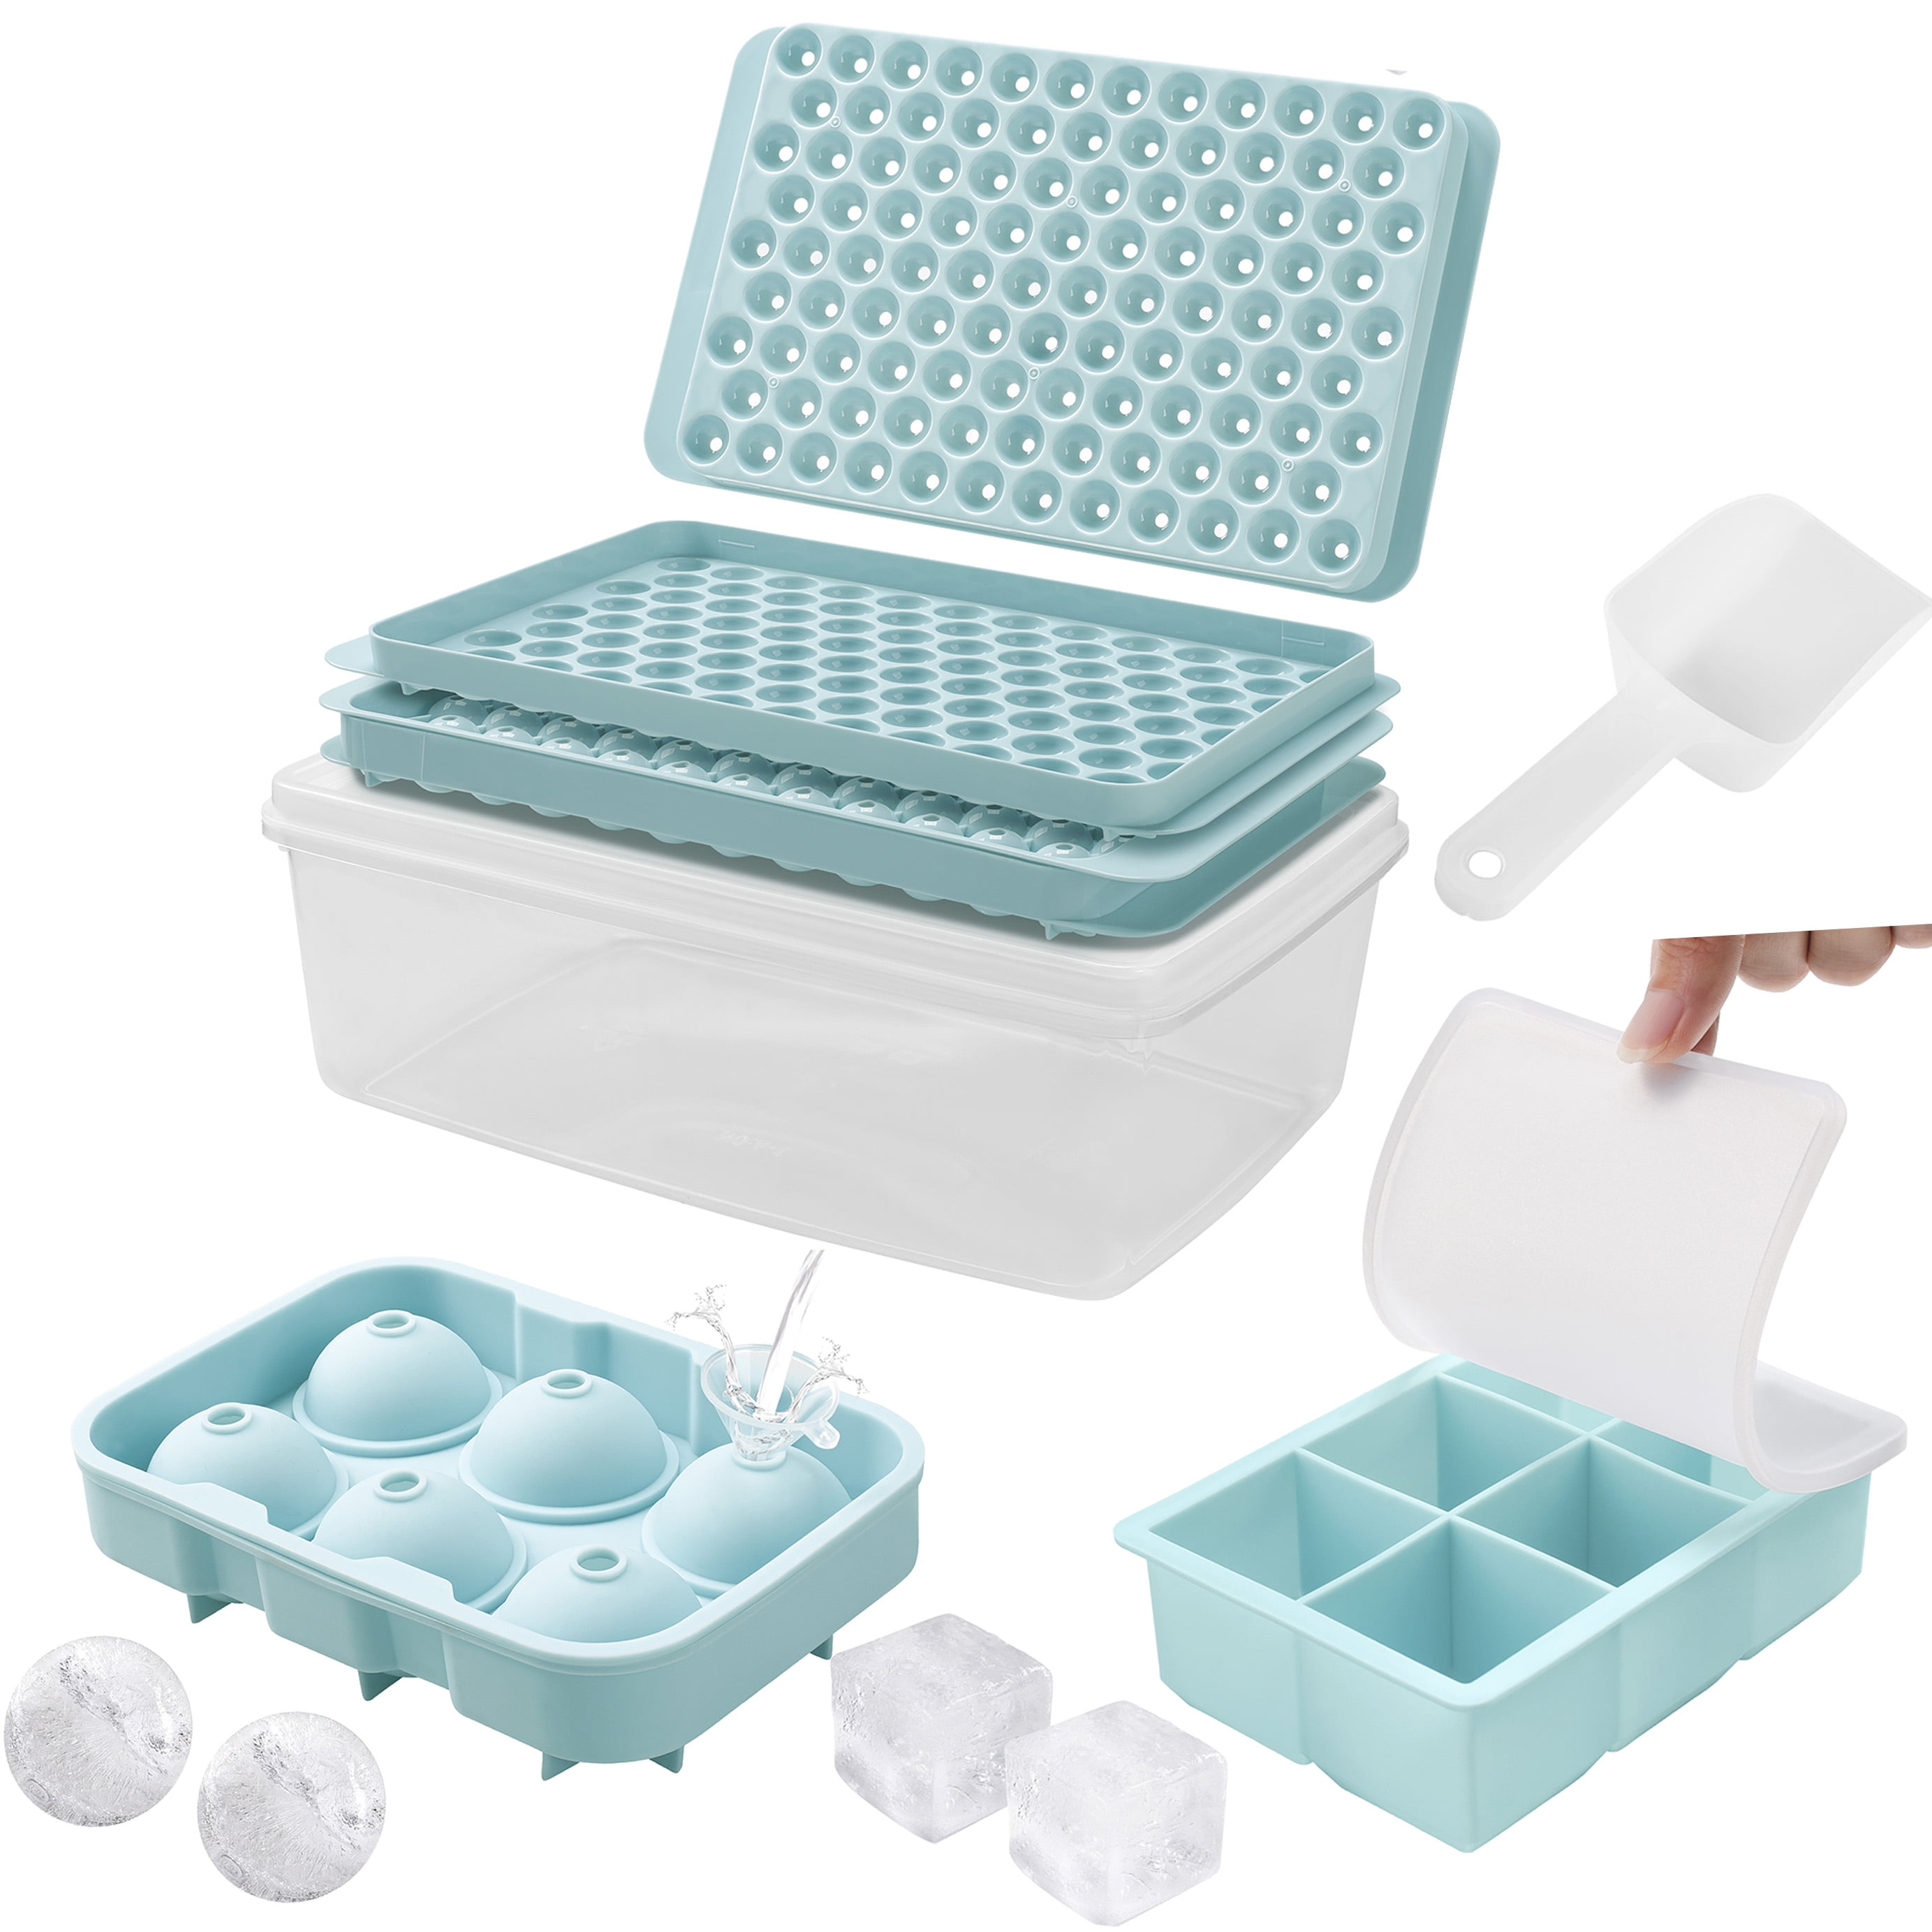 Four Stackable Ice Cube Trays For Freezer (Stack Empty or With Water) Ice  Trays (4 Ice Tray Per Order) Ice Cube Tray Set of Ice Cube Trays - (Blue)